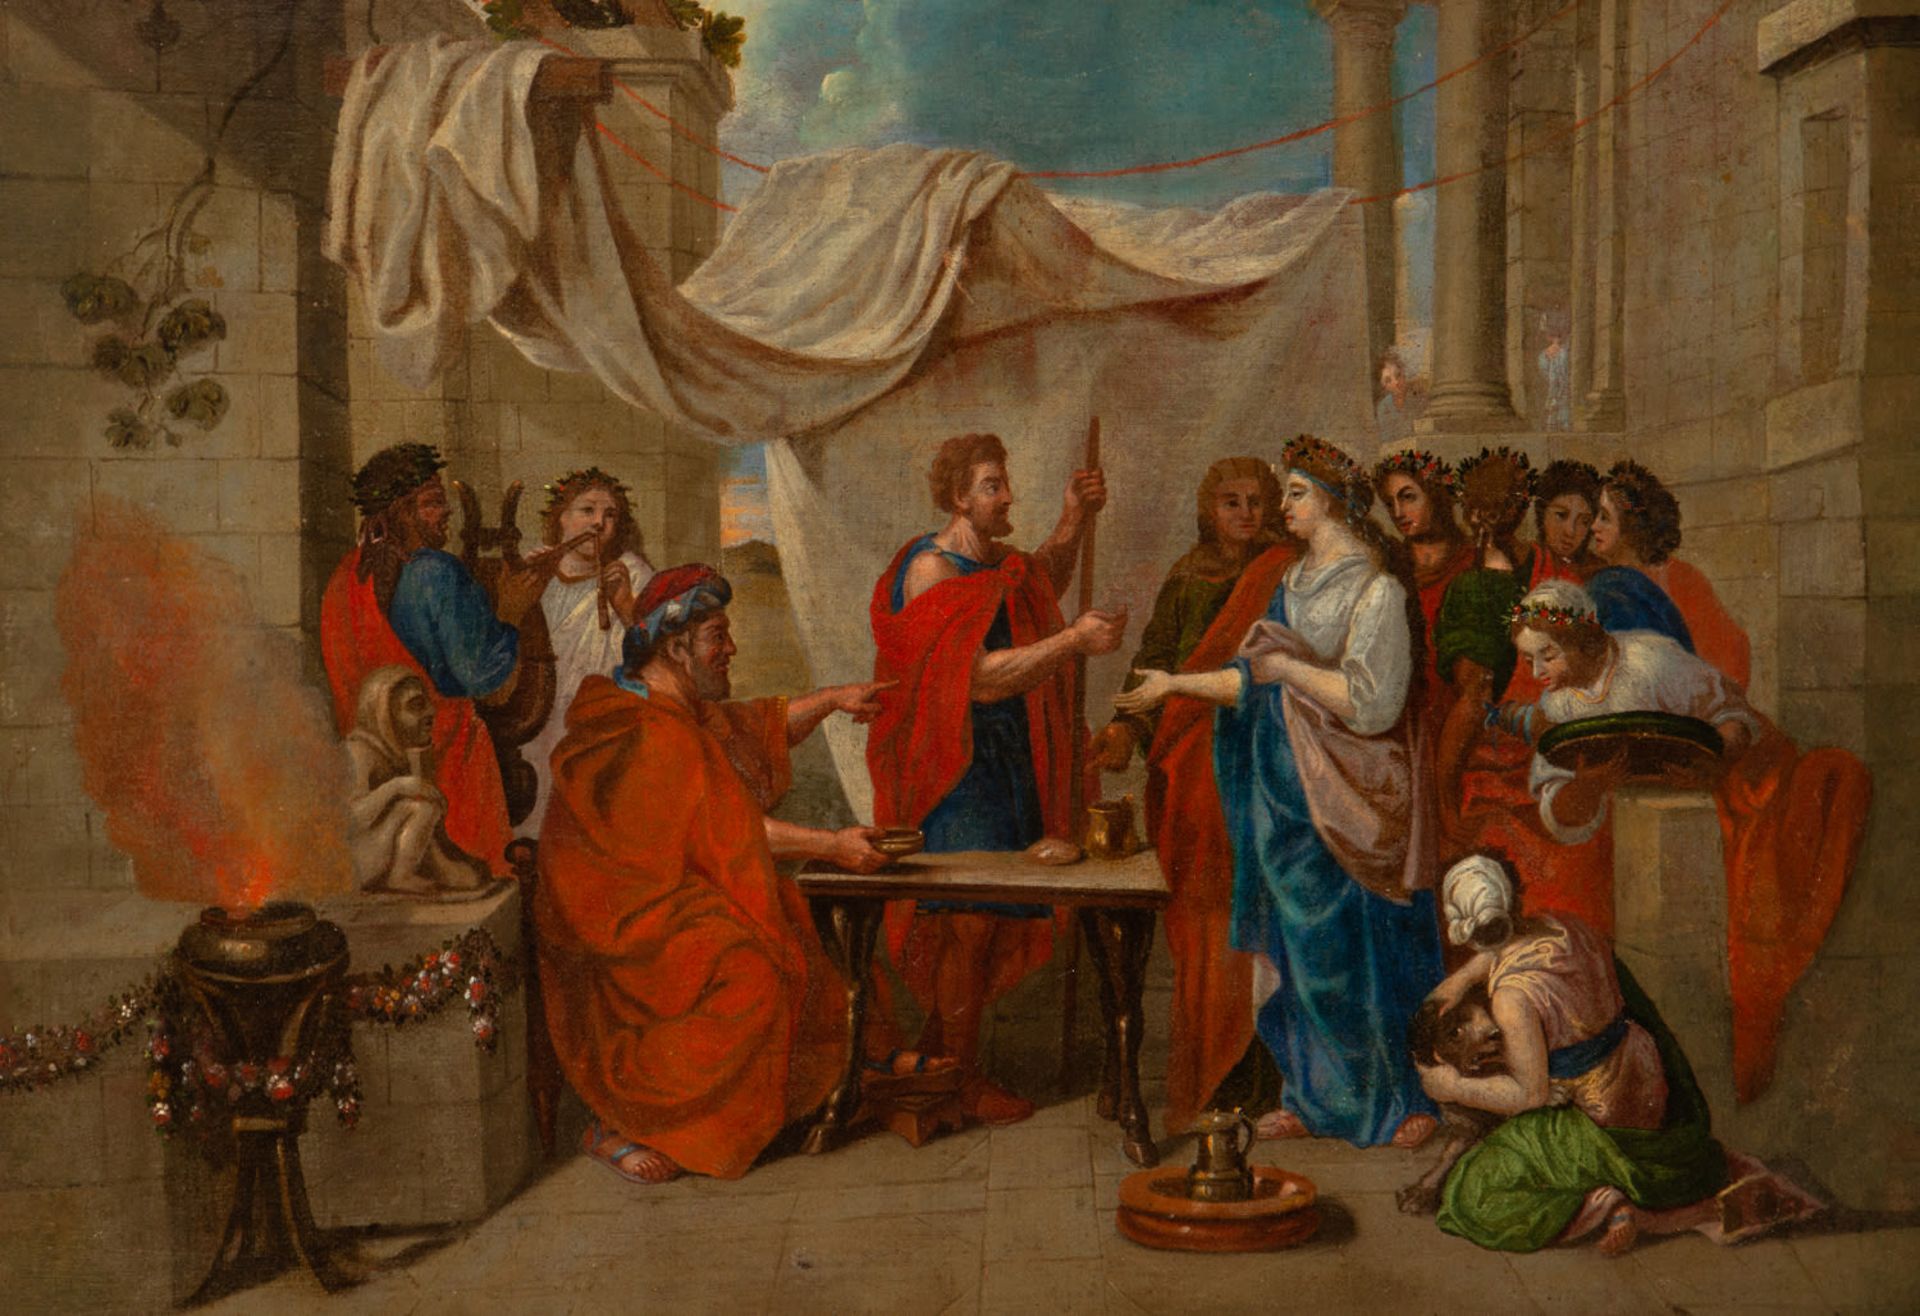 Salome in front of King Herod, 18th century Italian school - Image 2 of 5